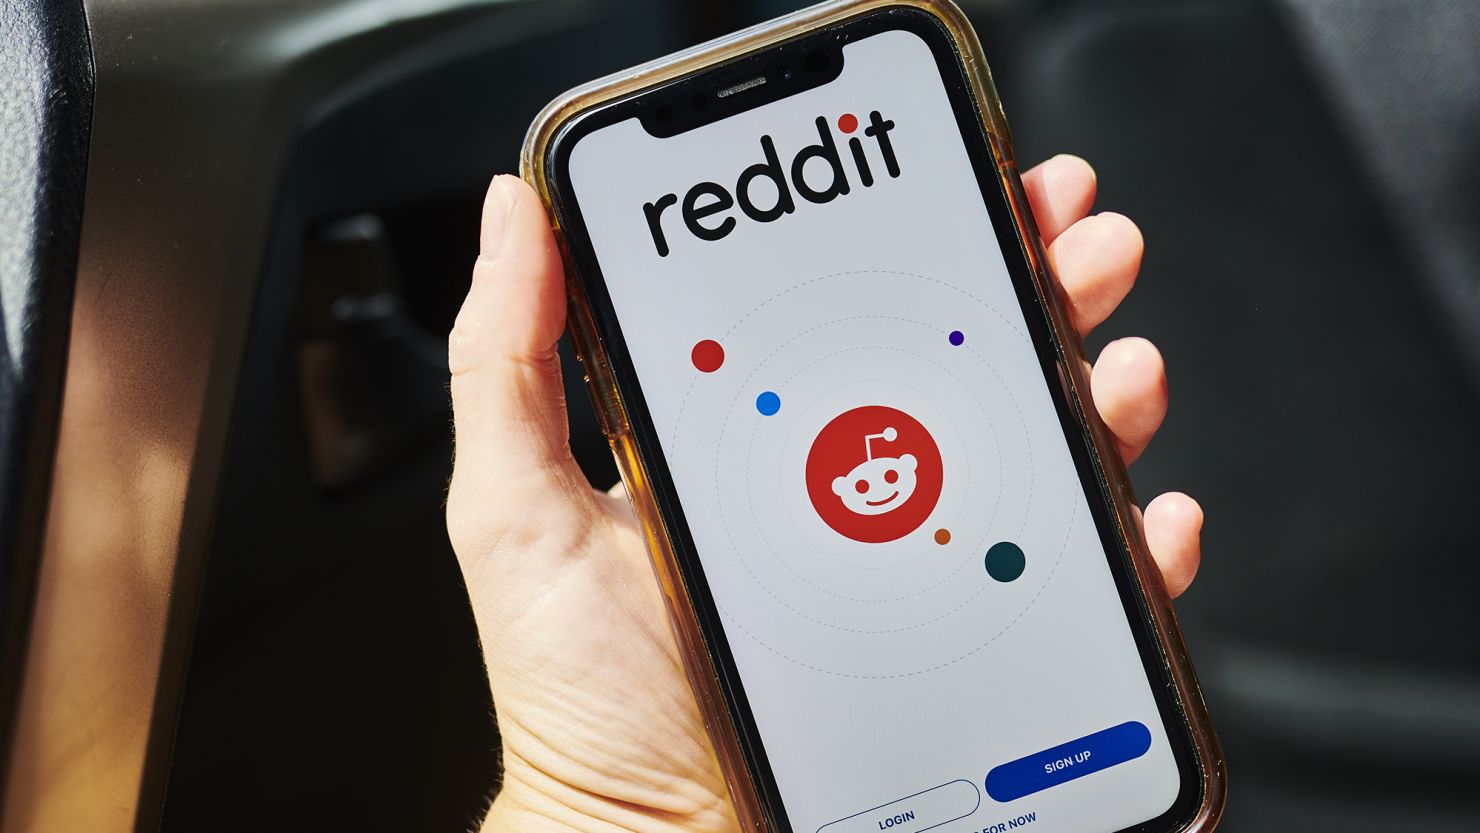 Some on Wall Street believe Reddit has room to grow, after increasing its user base by some 40% between 2021 and 2023.